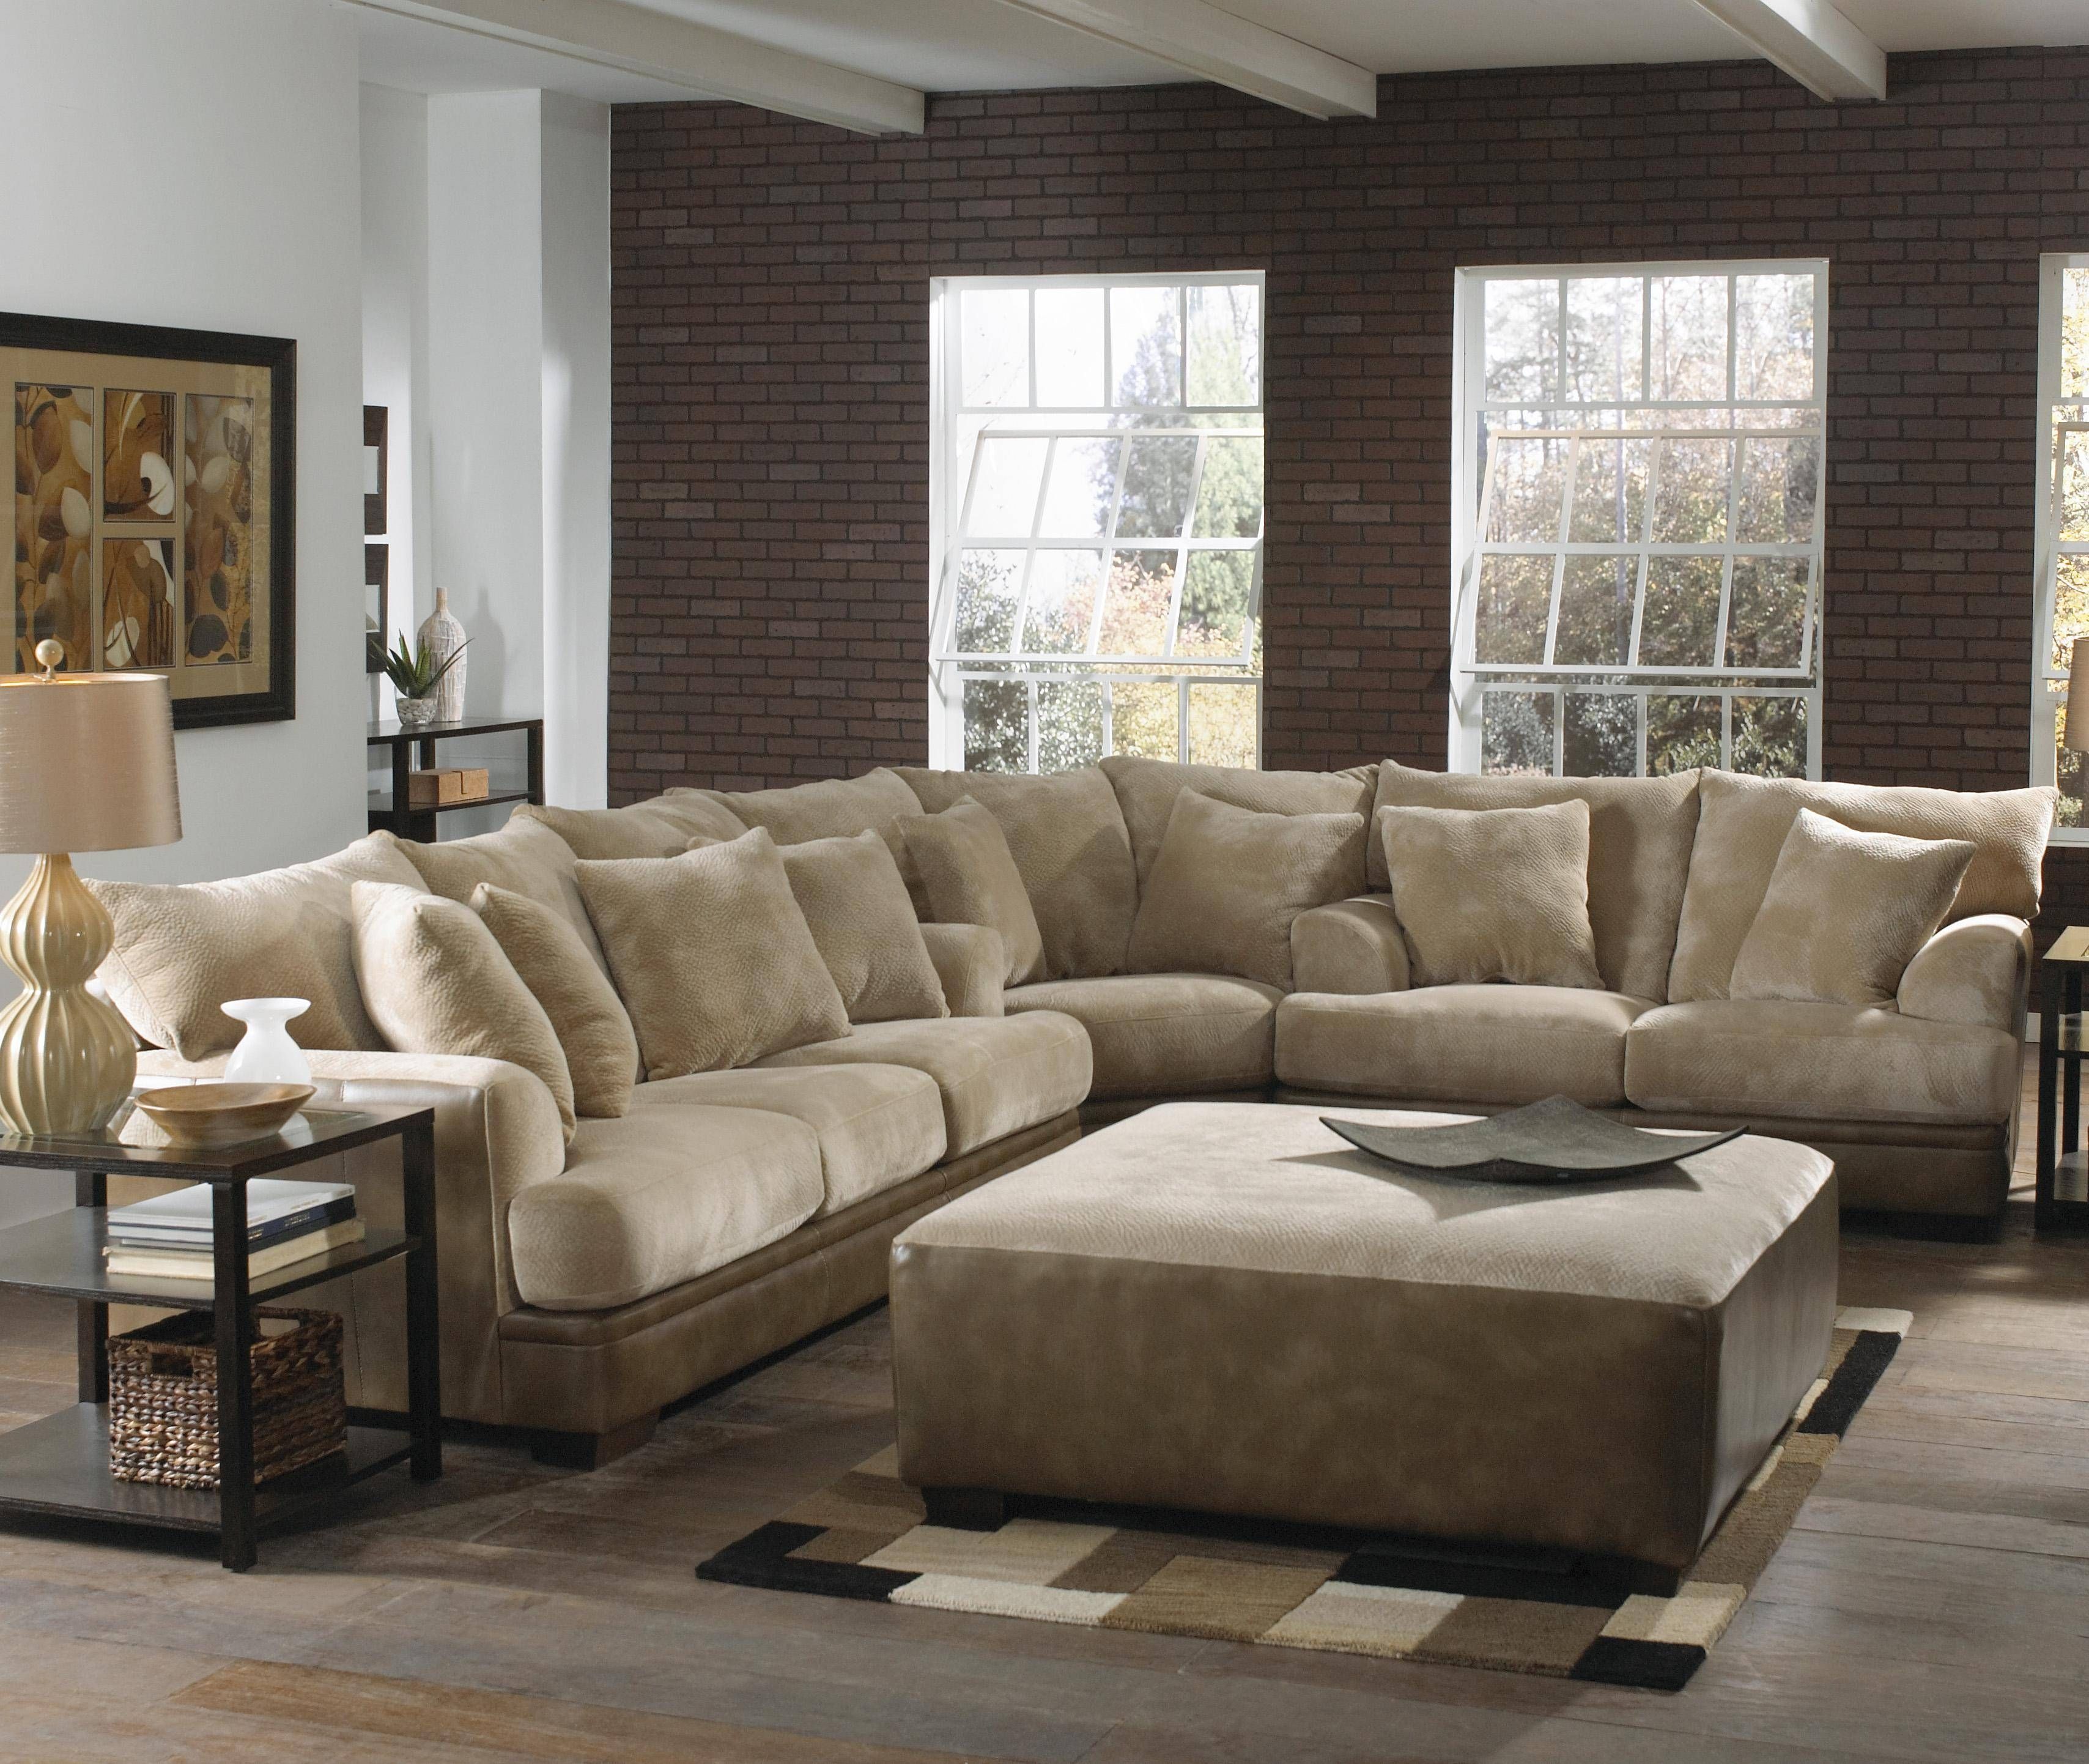 Furniture: Comfortable Deep Seat Sectional For Your Living Room With Regard To Large Comfortable Sectional Sofas (Photo 9 of 25)